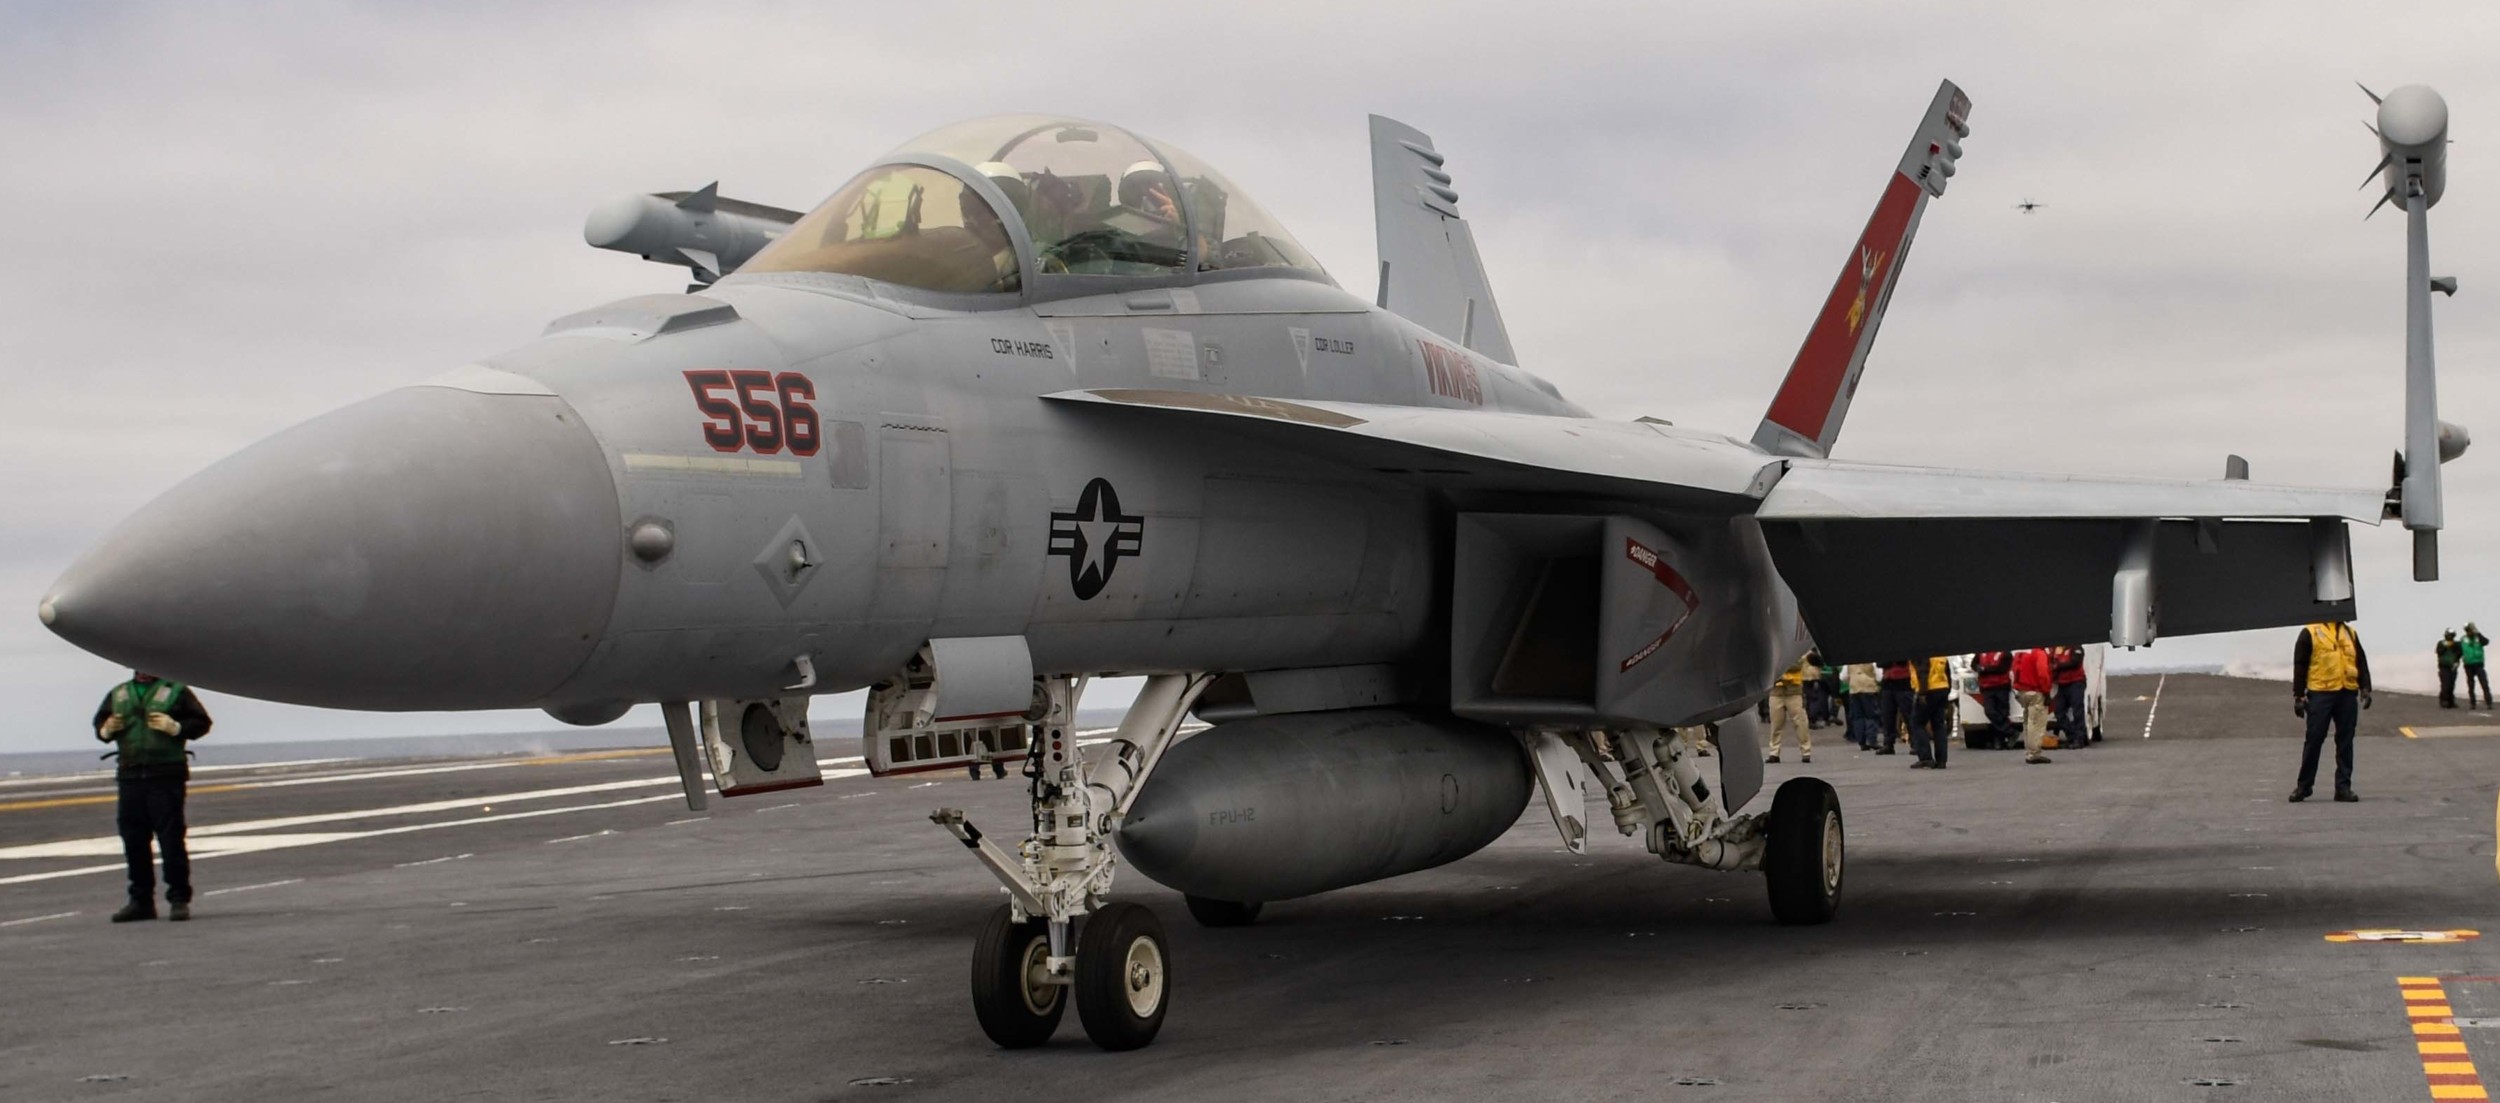 vaq-129 vikings electronic attack squadron fleet replacement frs us navy ea-18g growler 70